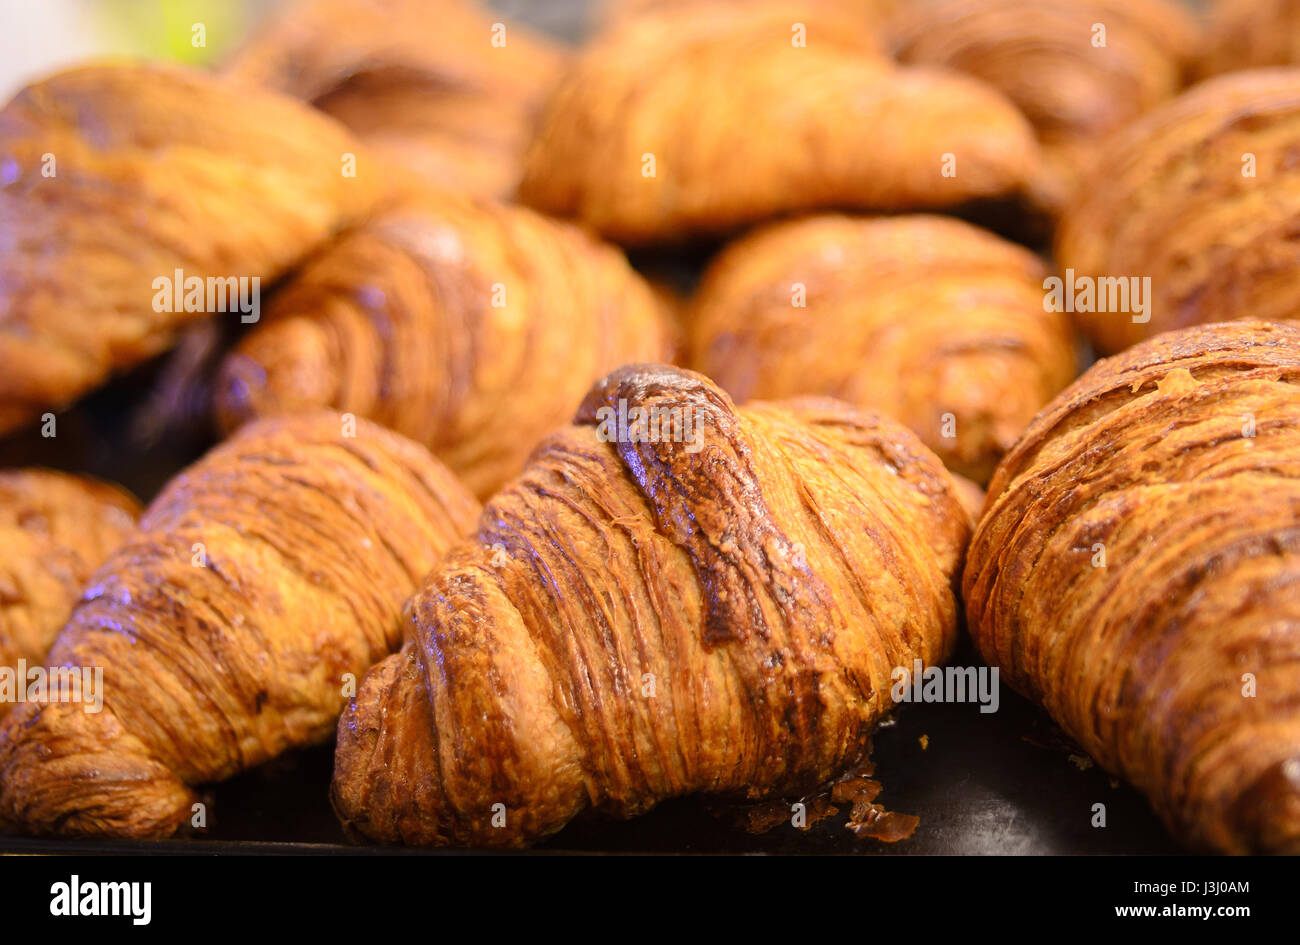 Delicious tray of croissant ready to eat Stock Photo